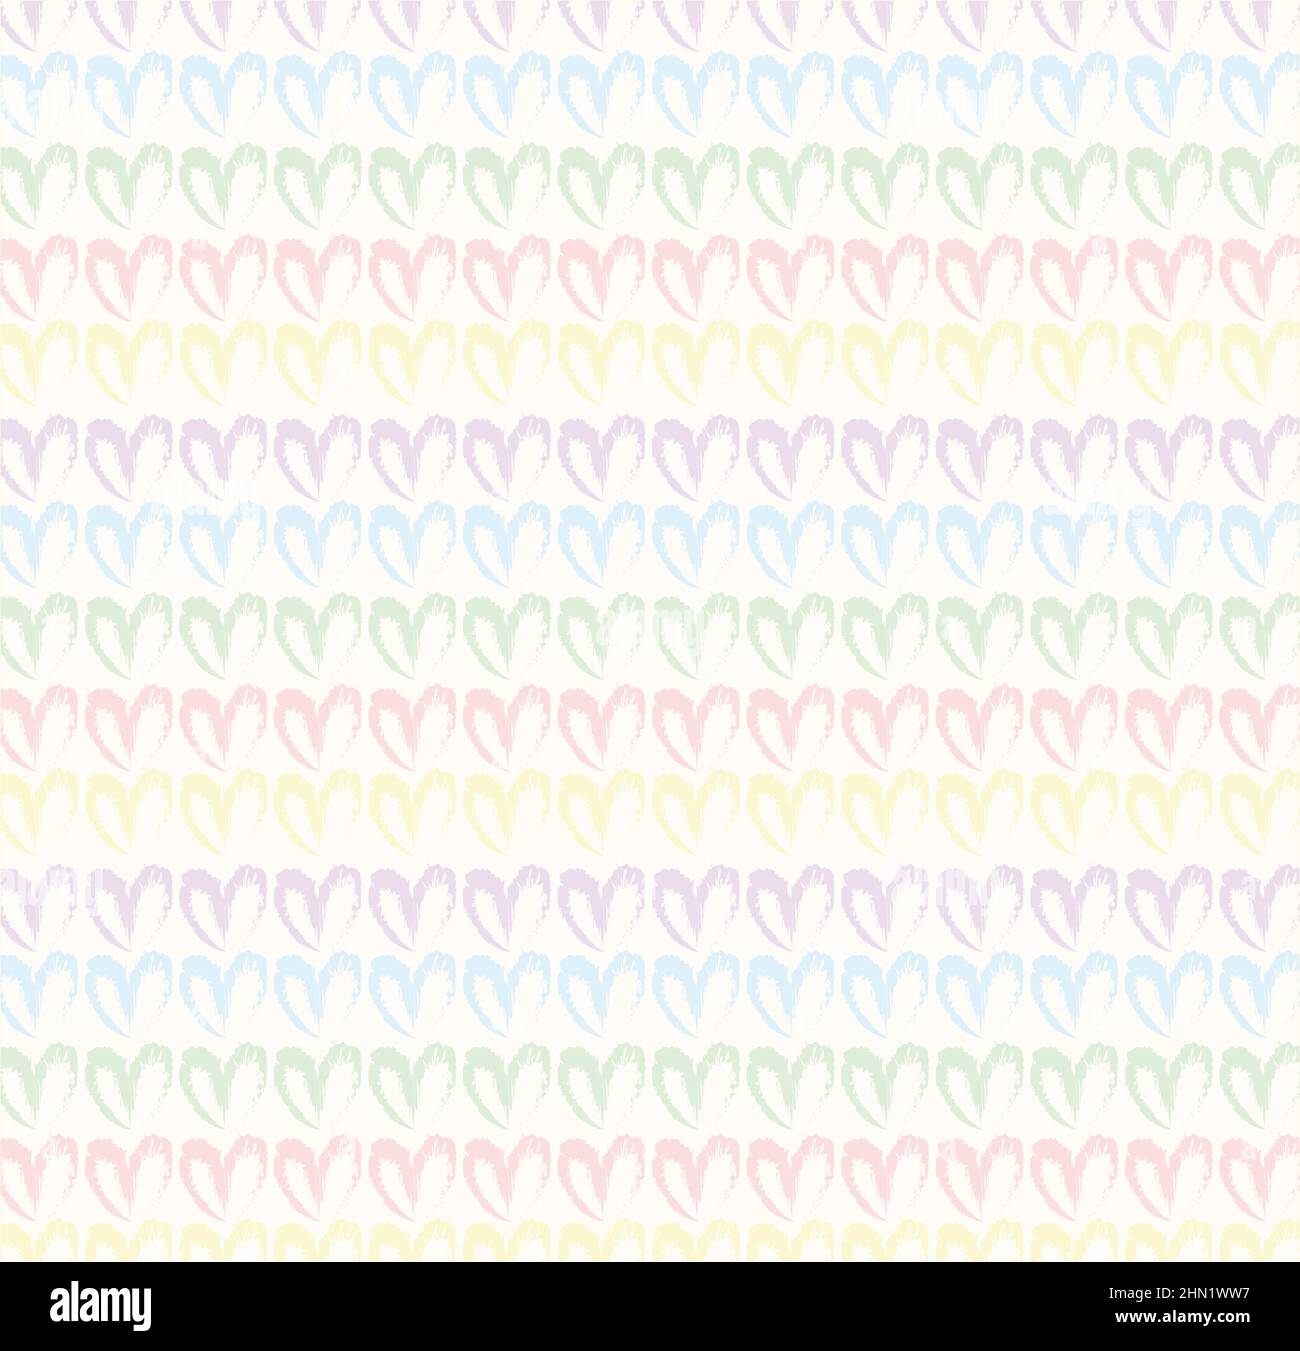 Seamless pattern of hand drawn simple hearts in pastel rainbow colors on beige and neutral background Stock Photo